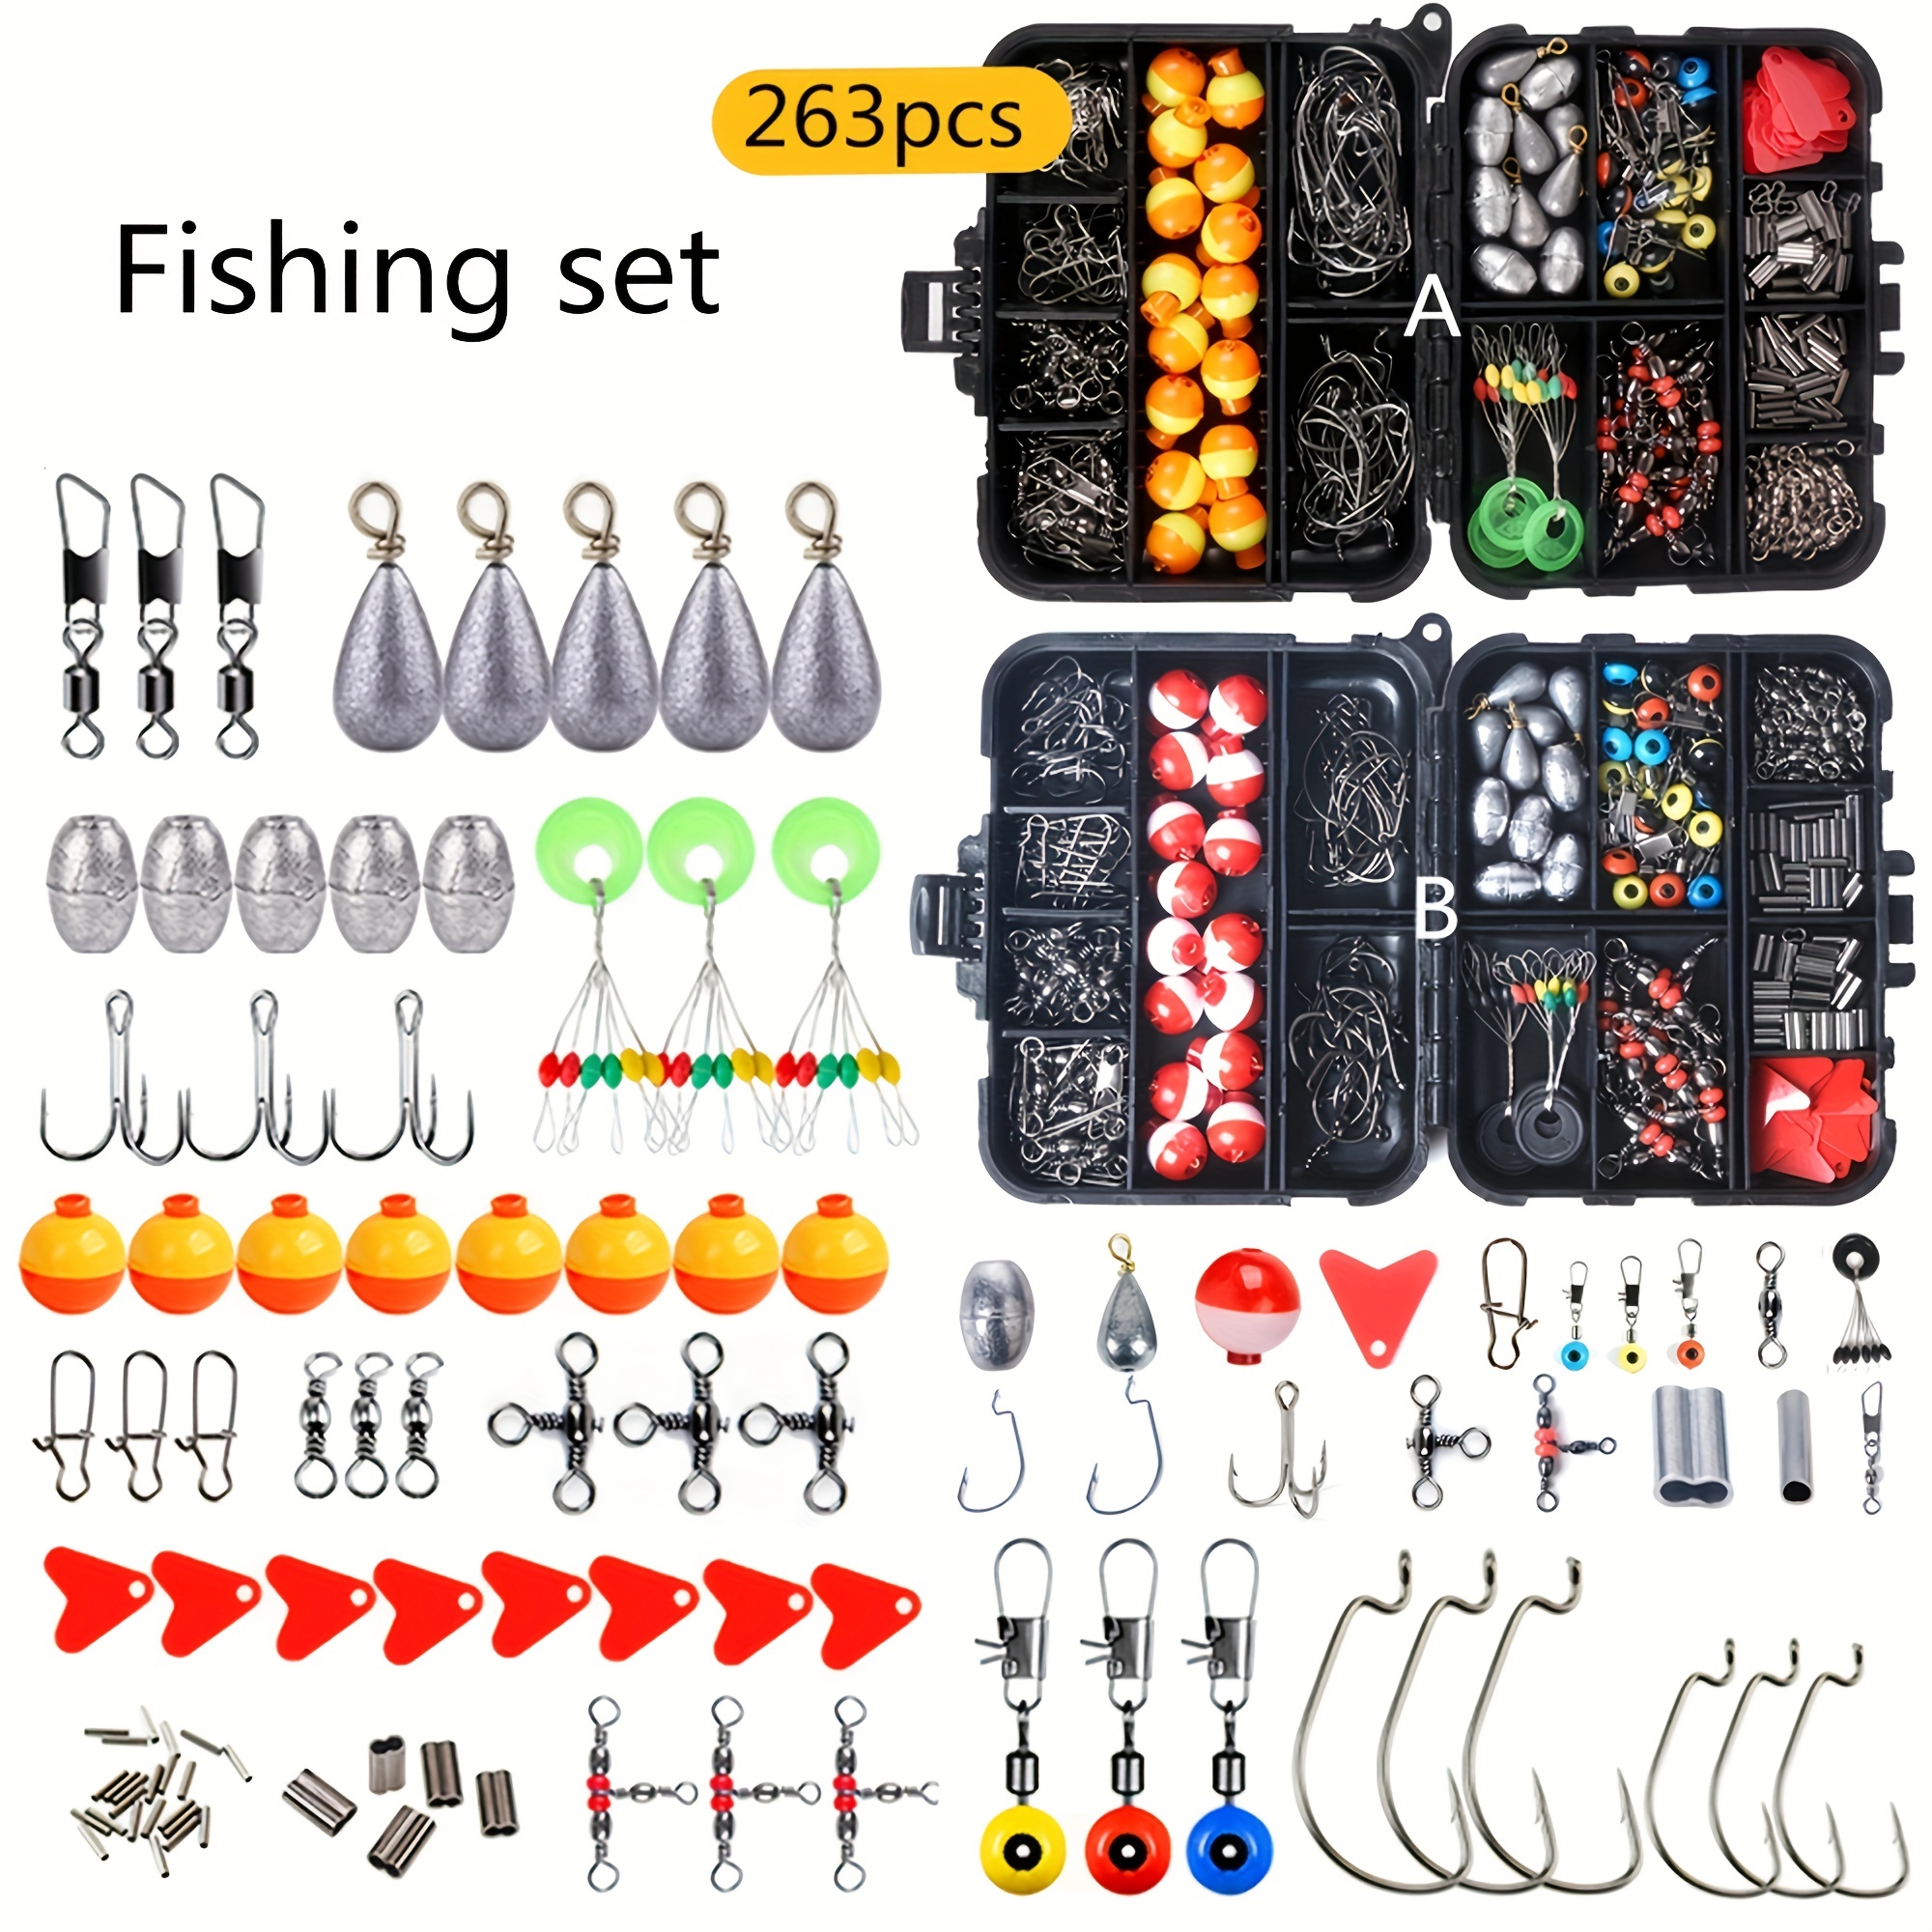 263 pieces Complete Fishing Gear Set - Includes Spherical Float, Lures,  Hooks, Sinkers, and More for a Successful Fishing Trip